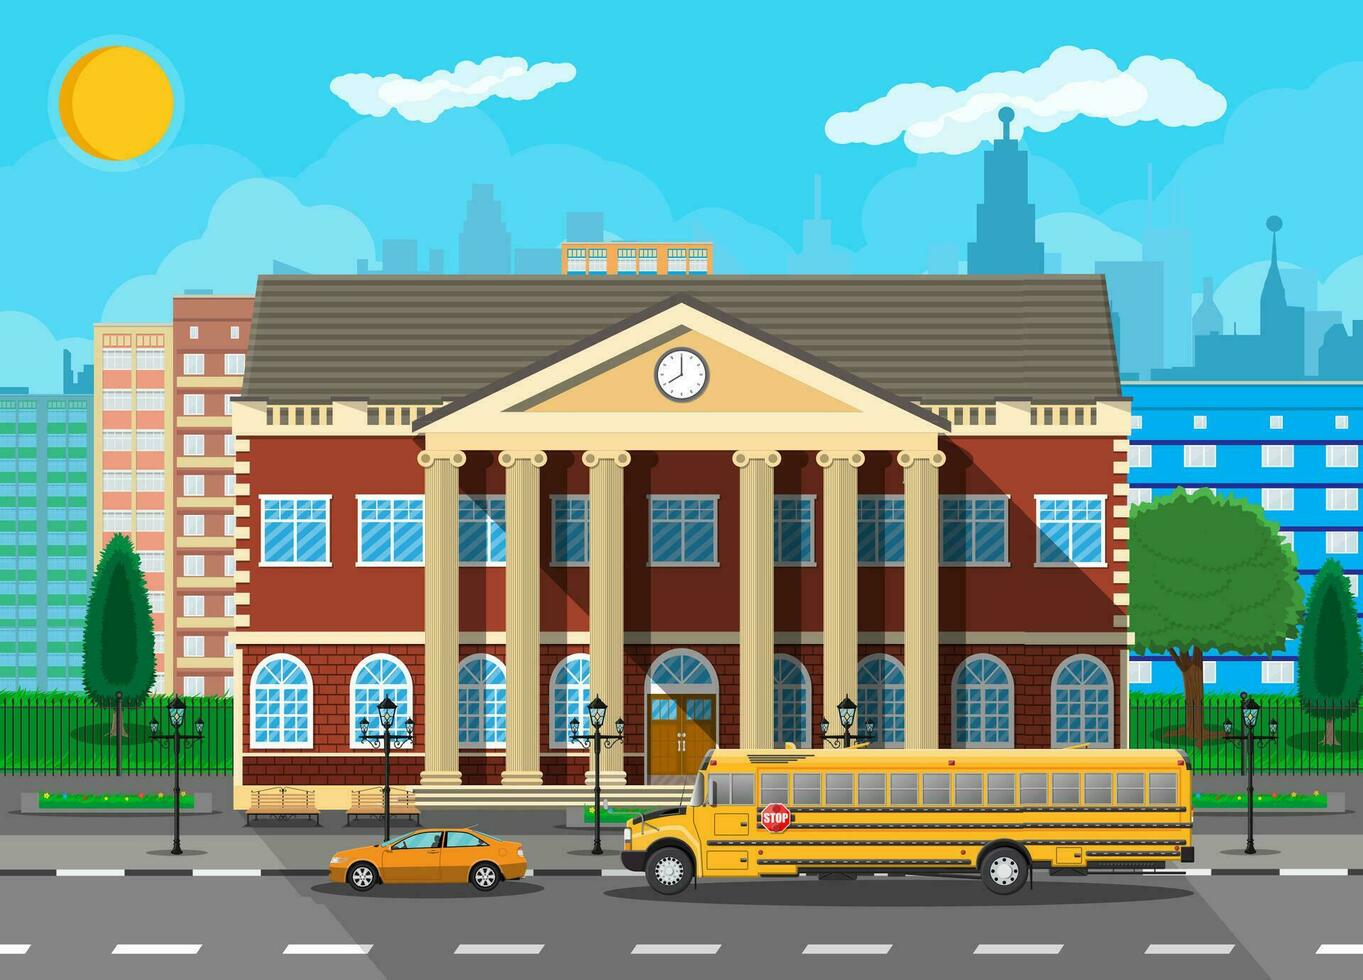 Classical school building and cityscape. Brick facade with clocks. Public educational institution and bus. College or university organization. Tree, clouds, sun. Vector illustration in flat style